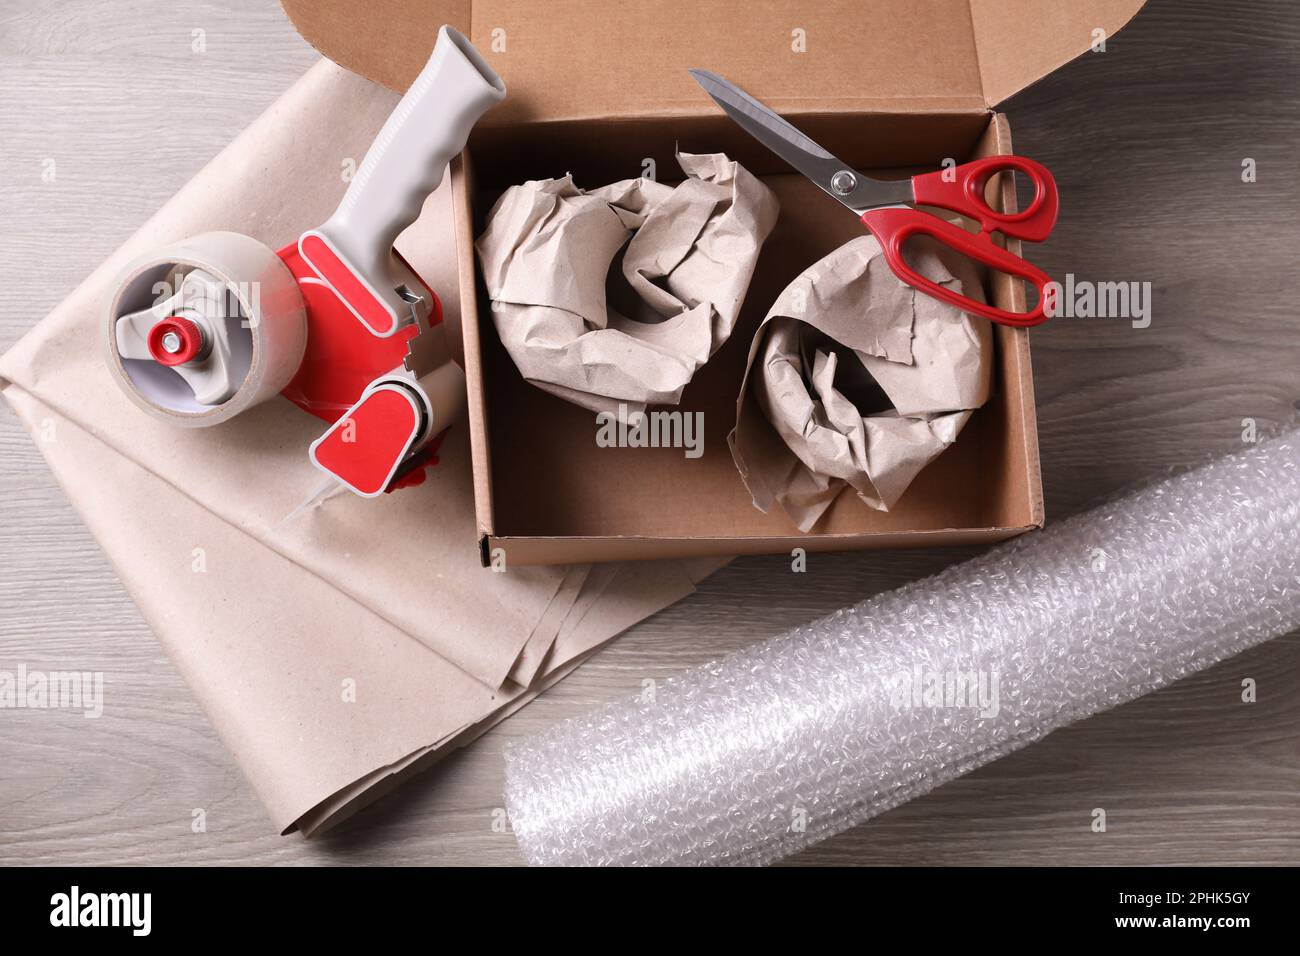 https://c8.alamy.com/comp/2PHK5GY/open-box-with-wrapped-items-adhesive-tape-scissors-paper-and-bubble-wrap-on-wooden-table-flat-lay-2PHK5GY.jpg